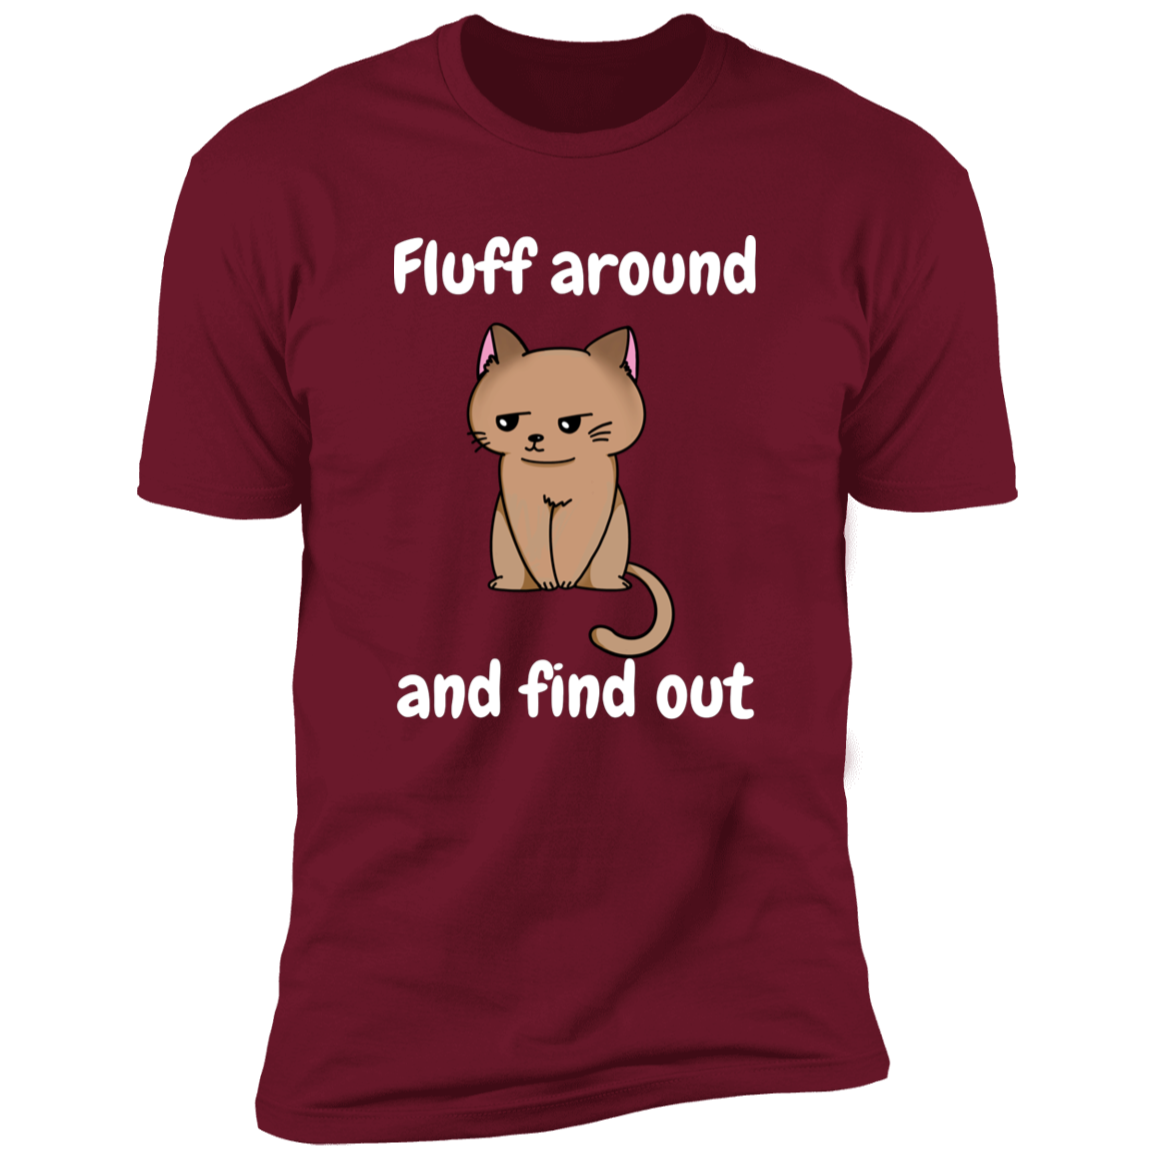 Fluff Around and Find Out Cat Shirt, funny cat shirt, funny cat shirt for humans, in cardinal red